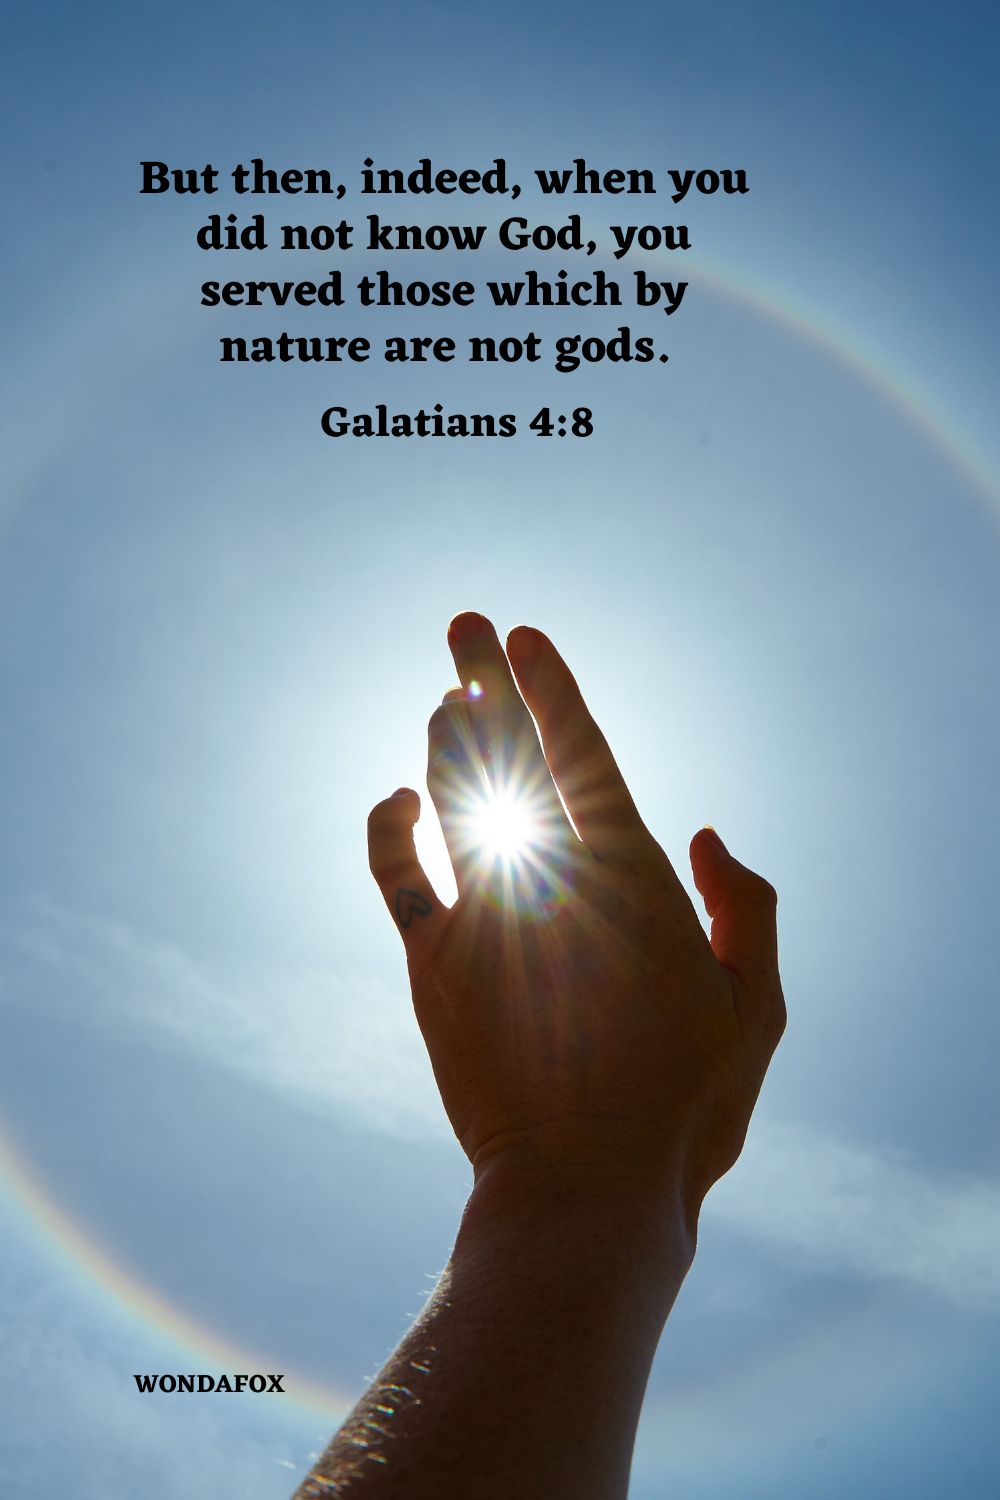 But then, indeed, when you did not know God, you served those which by nature are not gods.
Galatians 4:8